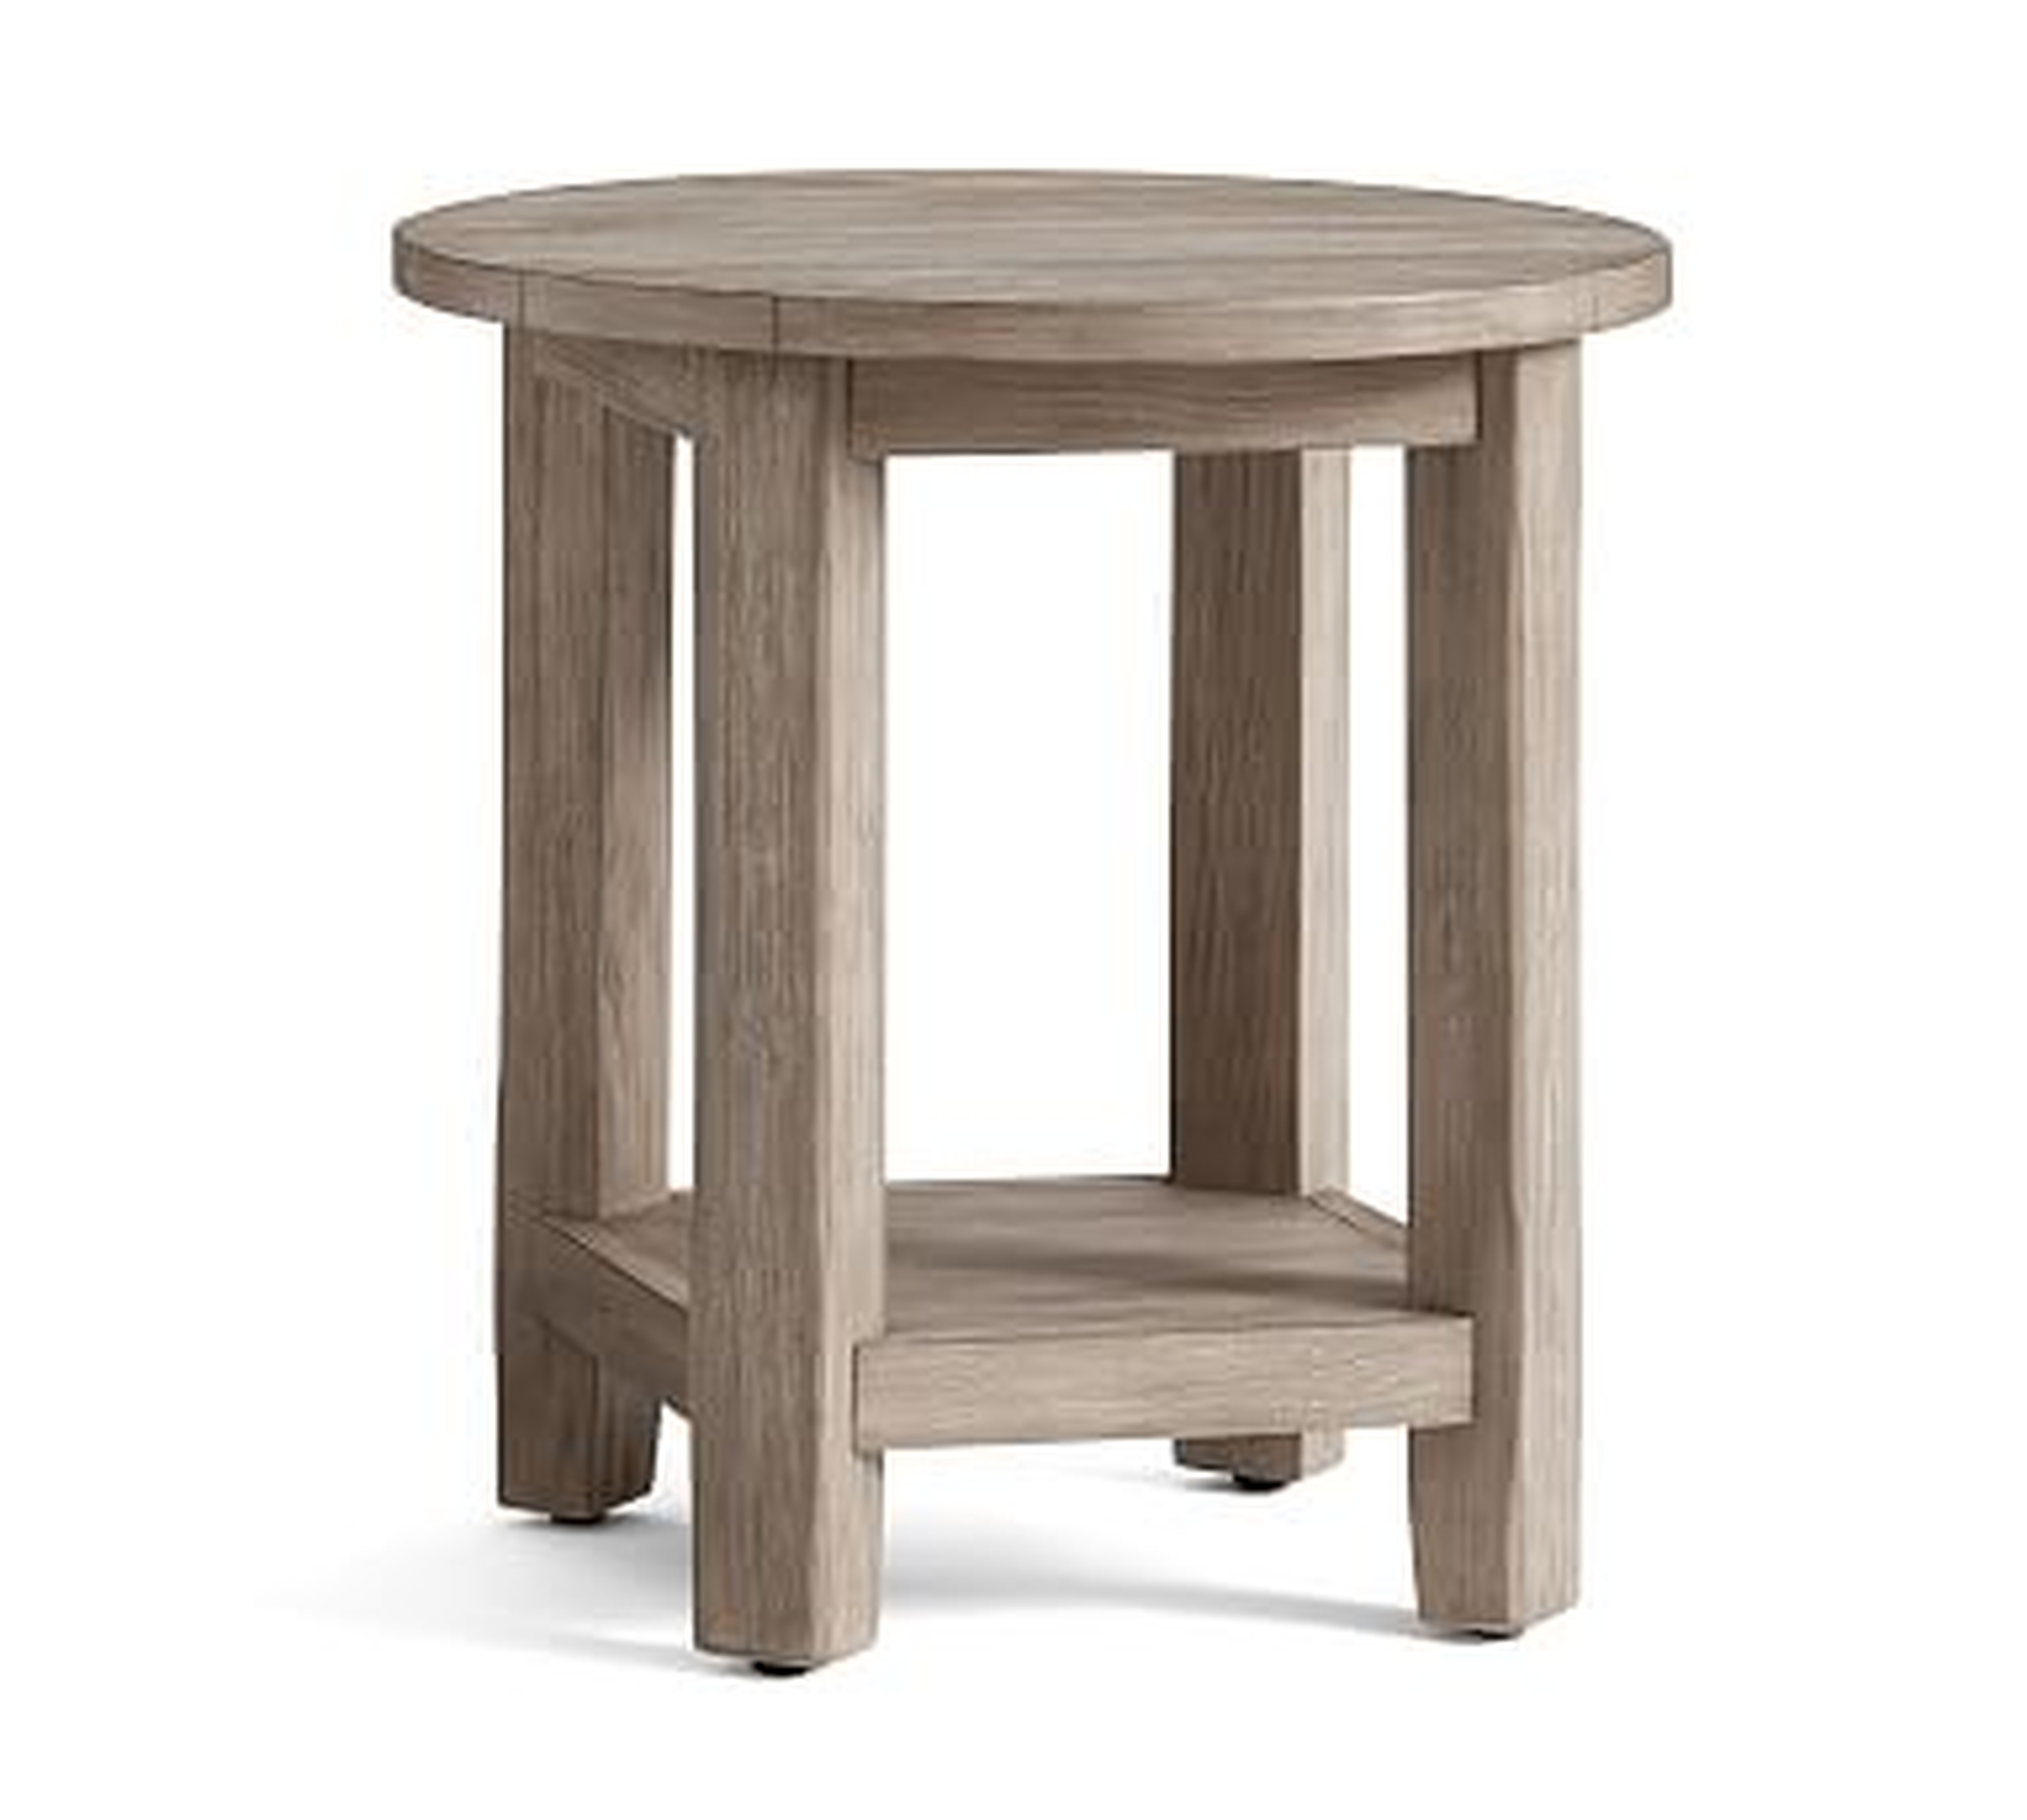 Benchwright Round End Table, Gray Wash - Pottery Barn